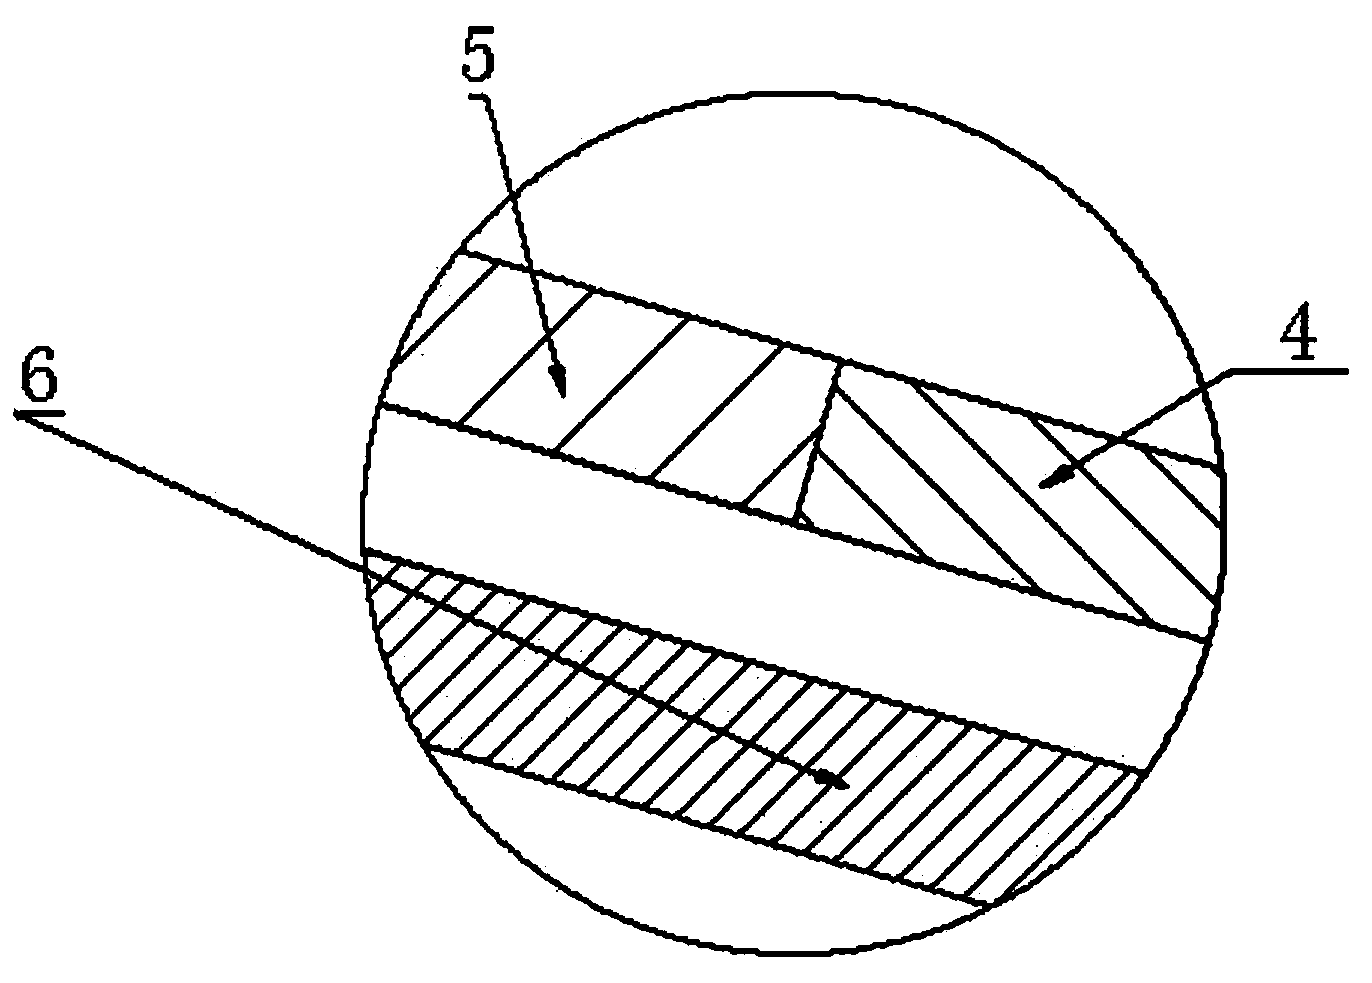 Spherical metal shell assembling method and detection tool special for implementing same